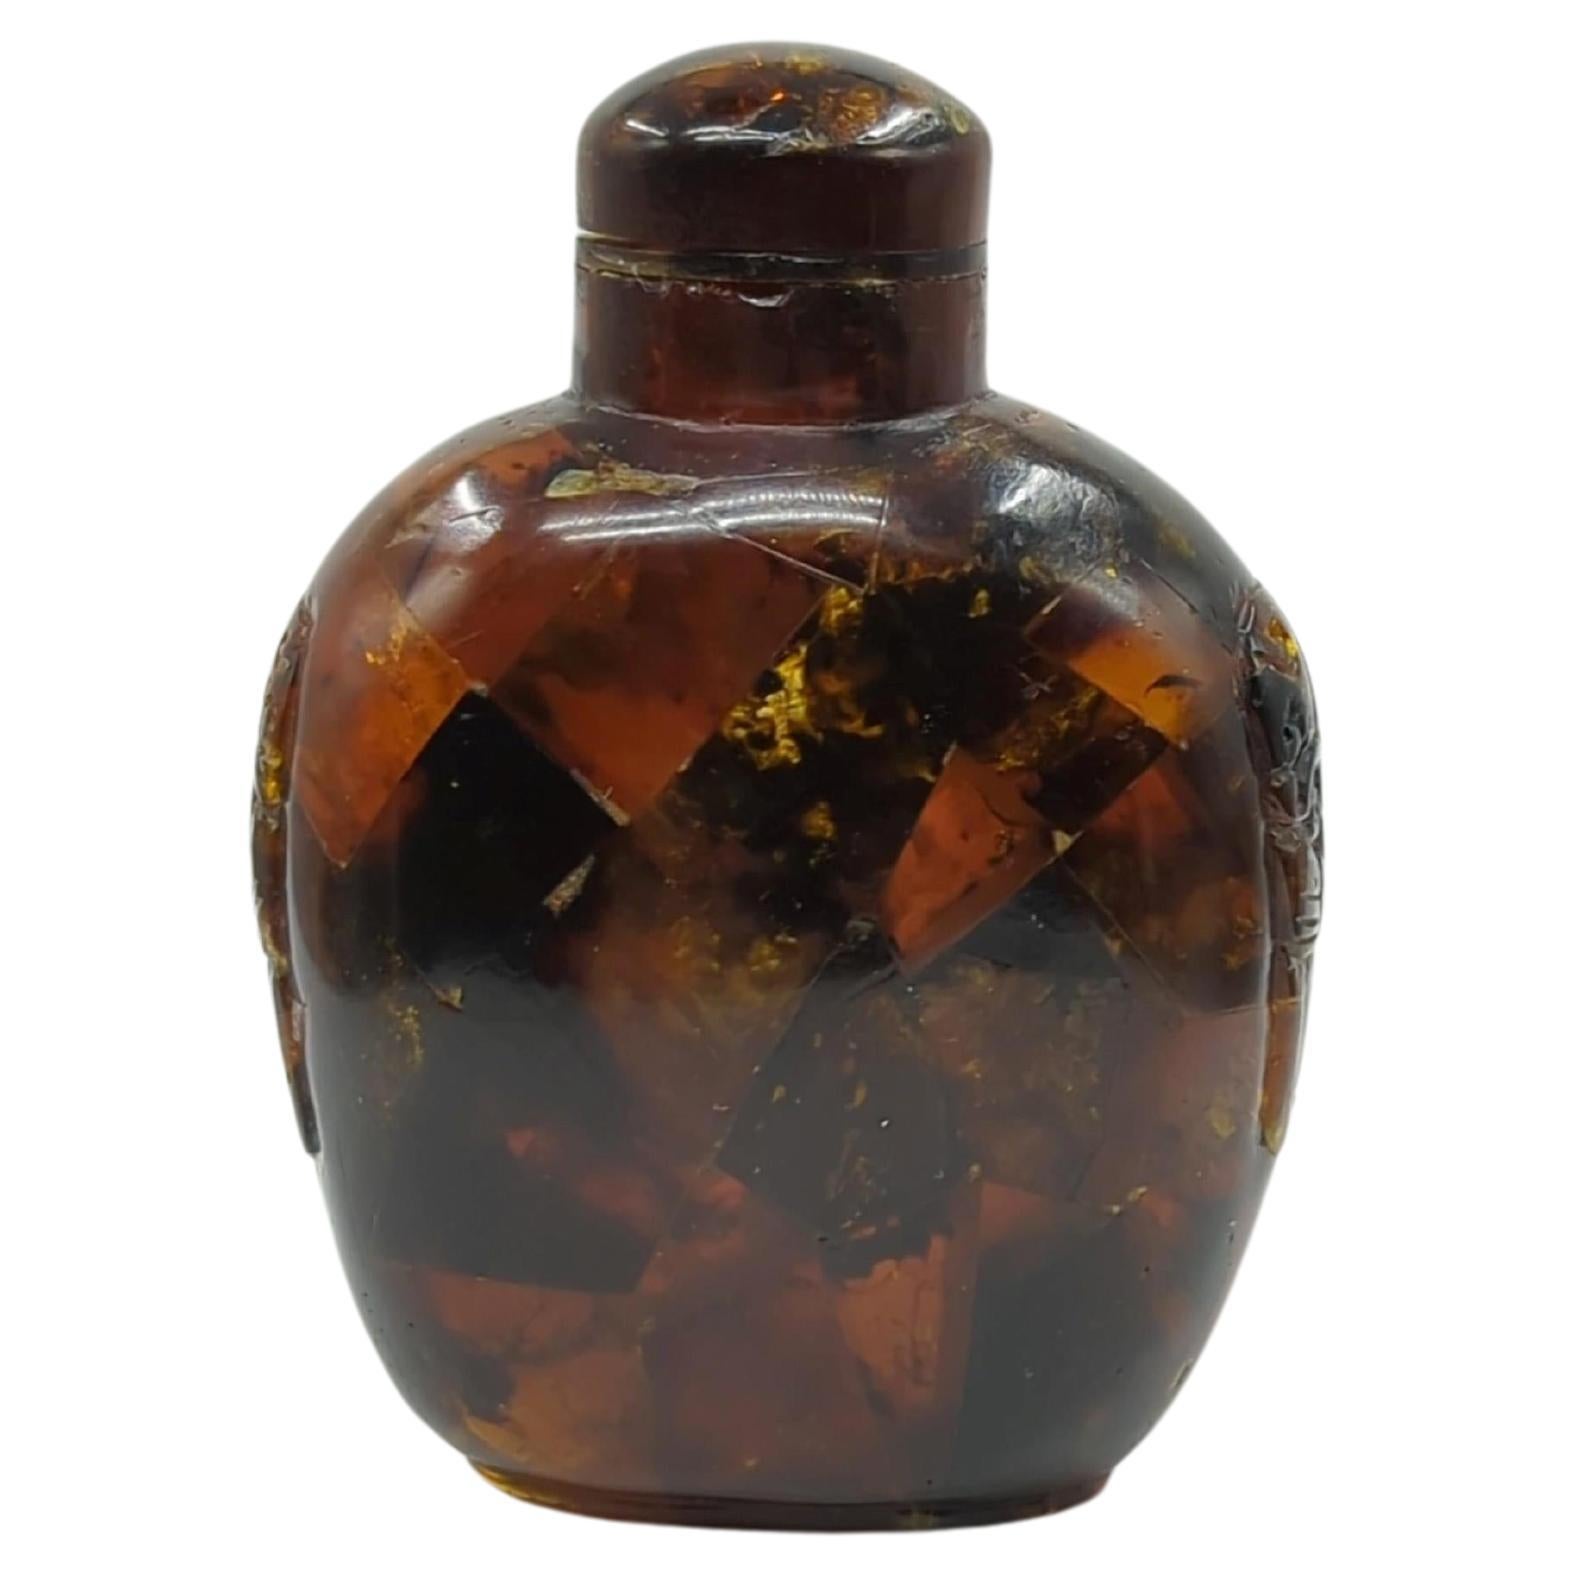 A late Qing period Chinese snuff bottle, crafted from composite amber. This bottle is adorned with meticulously carved beast and ring taotie motifs on its shoulders, and slightly raised on a carved footring. 

The use of composite amber not only